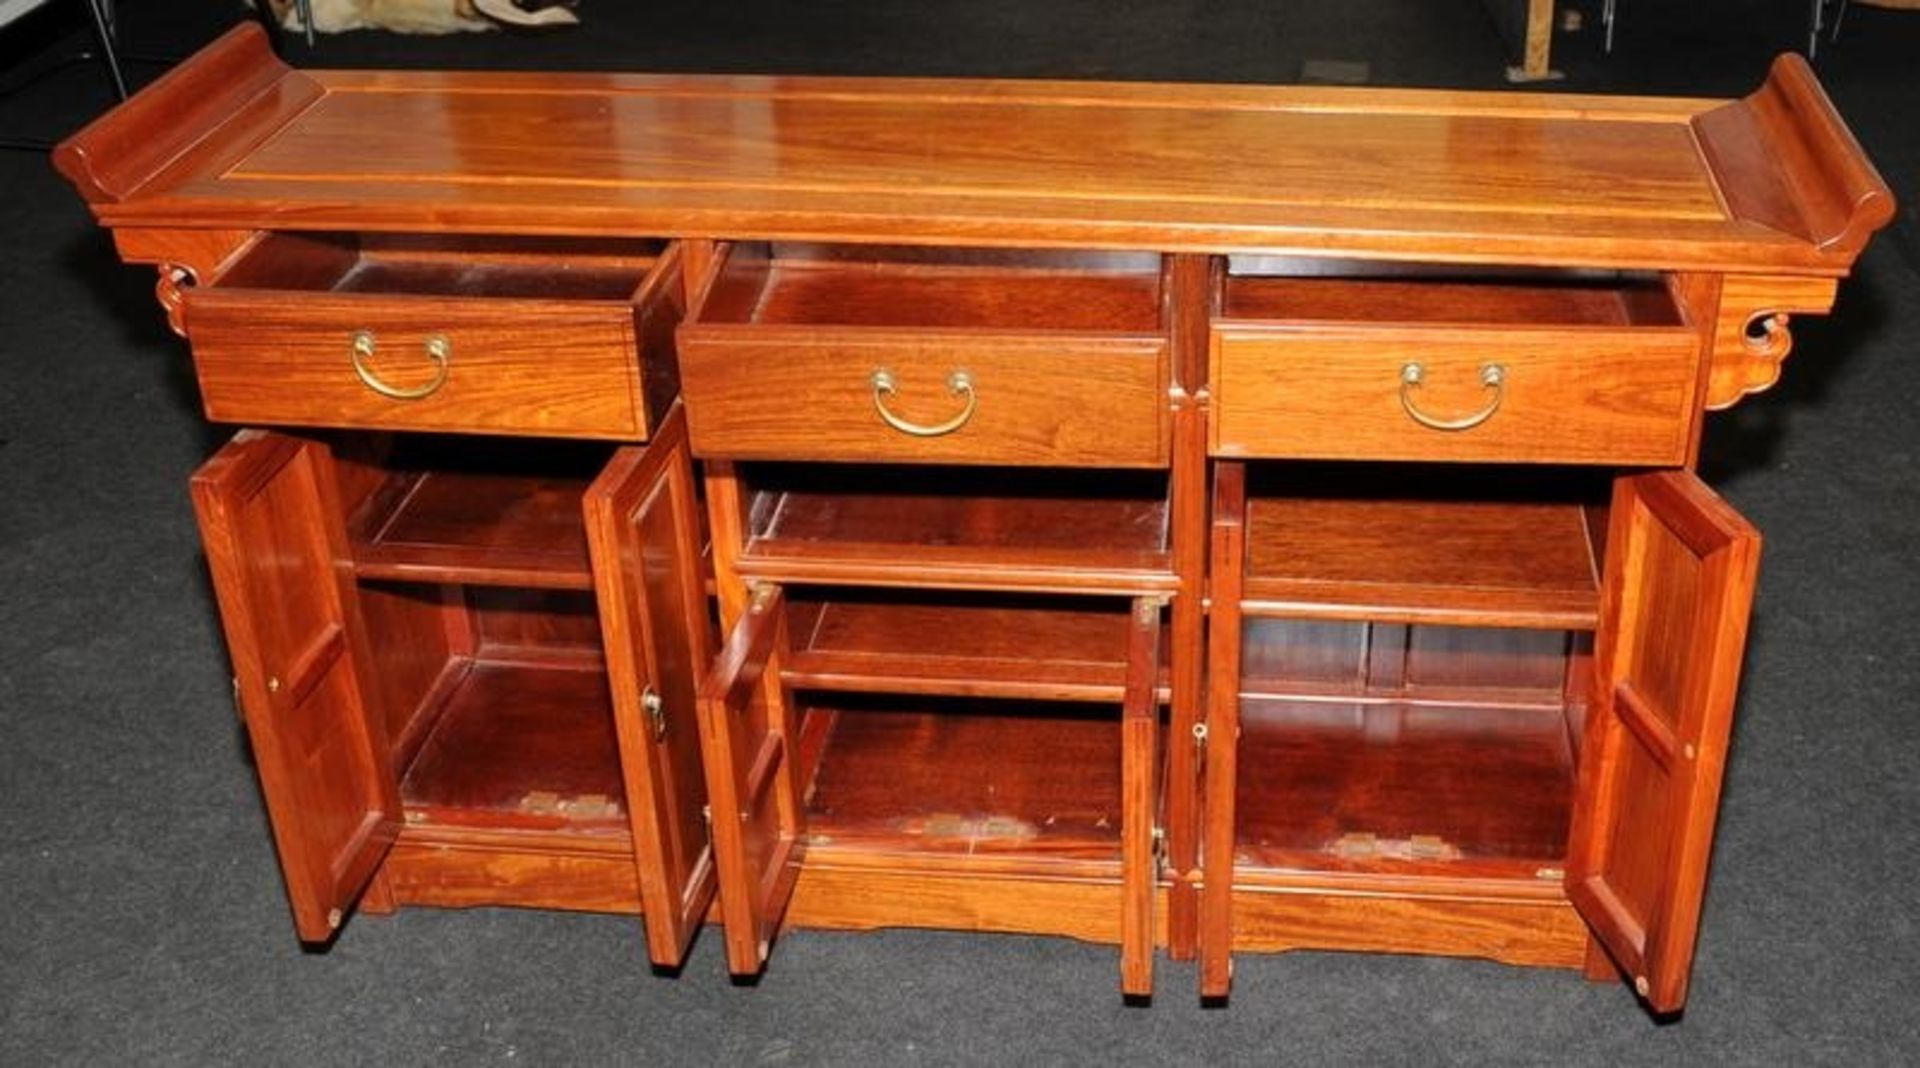 Chinese style hall table with three drawers over cupboards. 148cms wide x 81cms tall x 35cms deep - Image 3 of 4